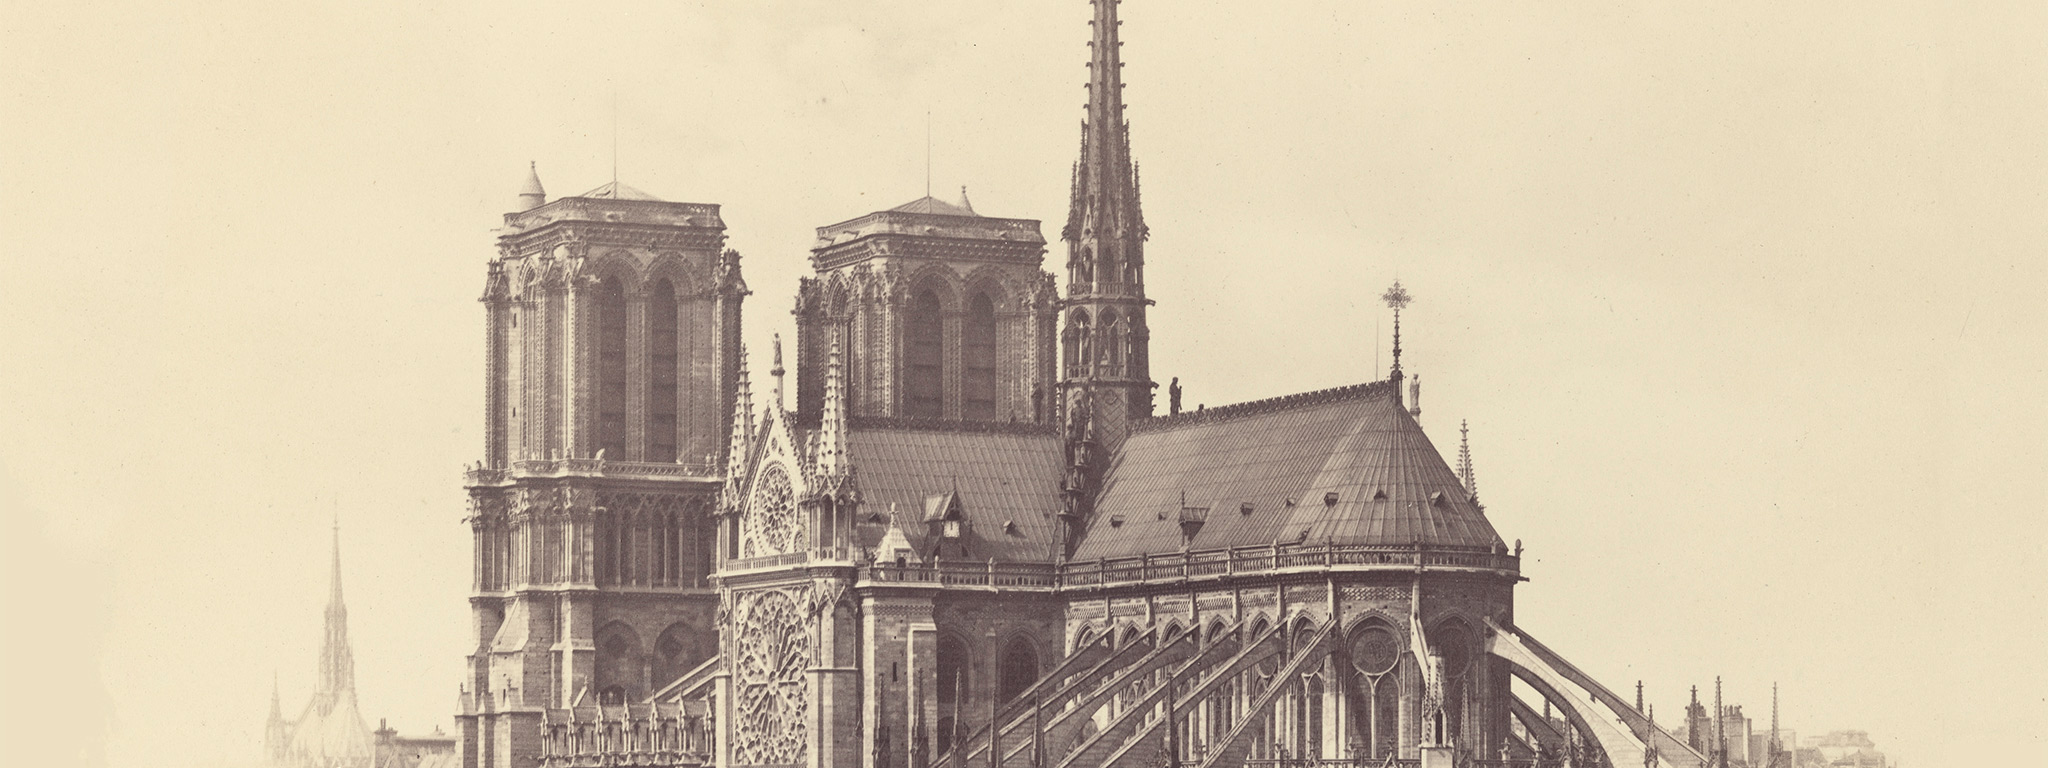 Apse of Notre-Dame of Paris, Viewed from the Bank of La Tournelle (detail), 1860-70, Charles Soulier, albumen silver print. The J. Paul Getty Museum